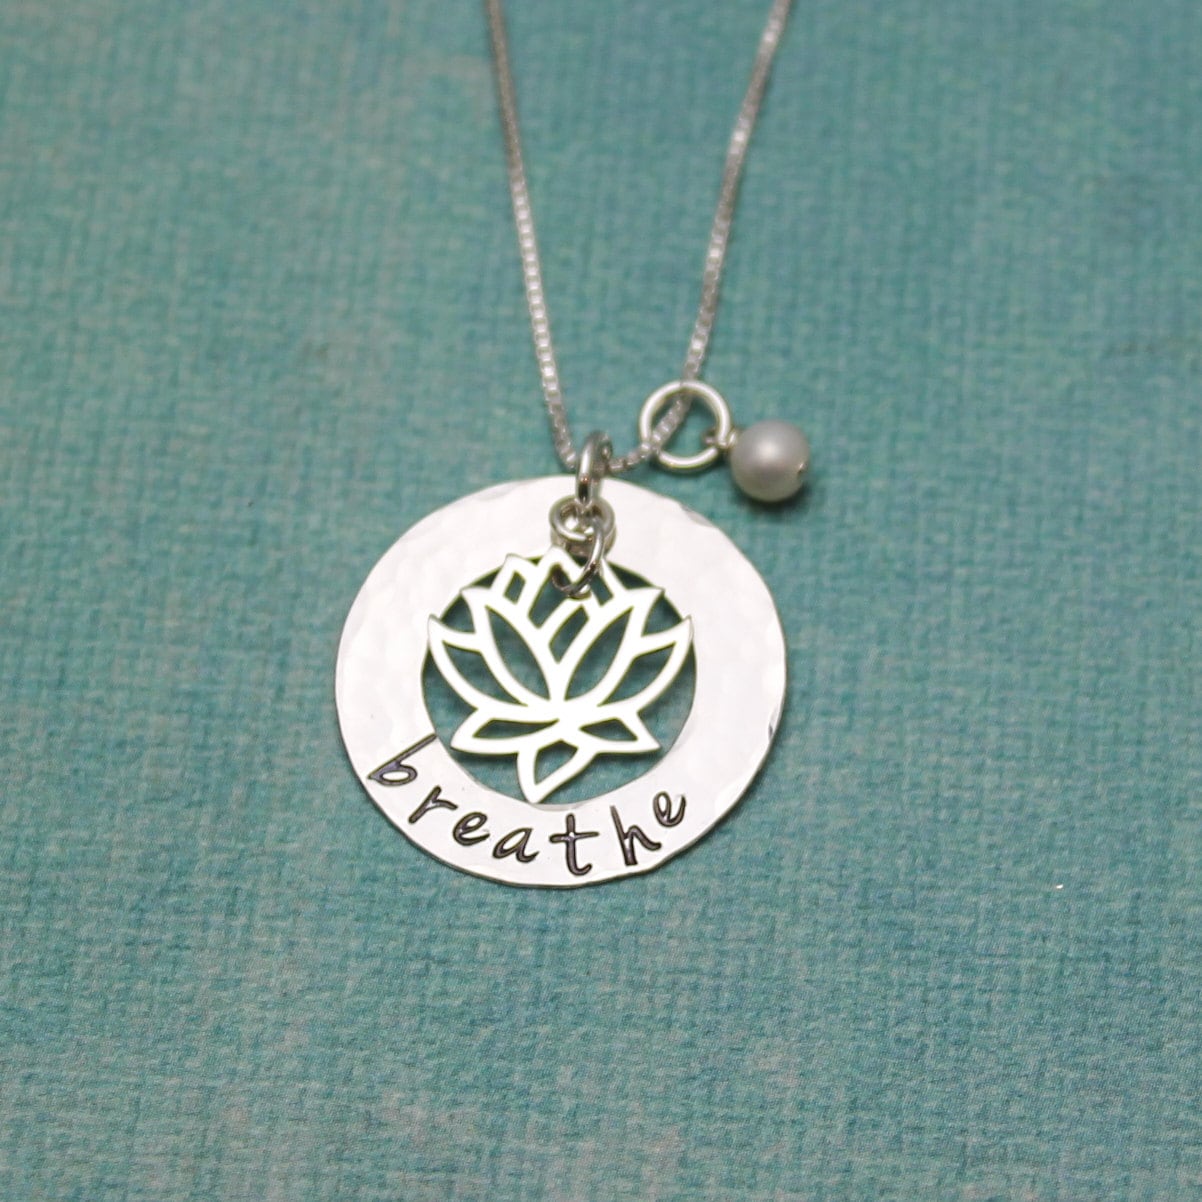 BREATHE Lotus Necklace, Yoga Jewelry, Lotus Flower Necklace, Yoga Gifts, Meditation Jewelry, Hand Stamped Jewelry, Sterling Silver